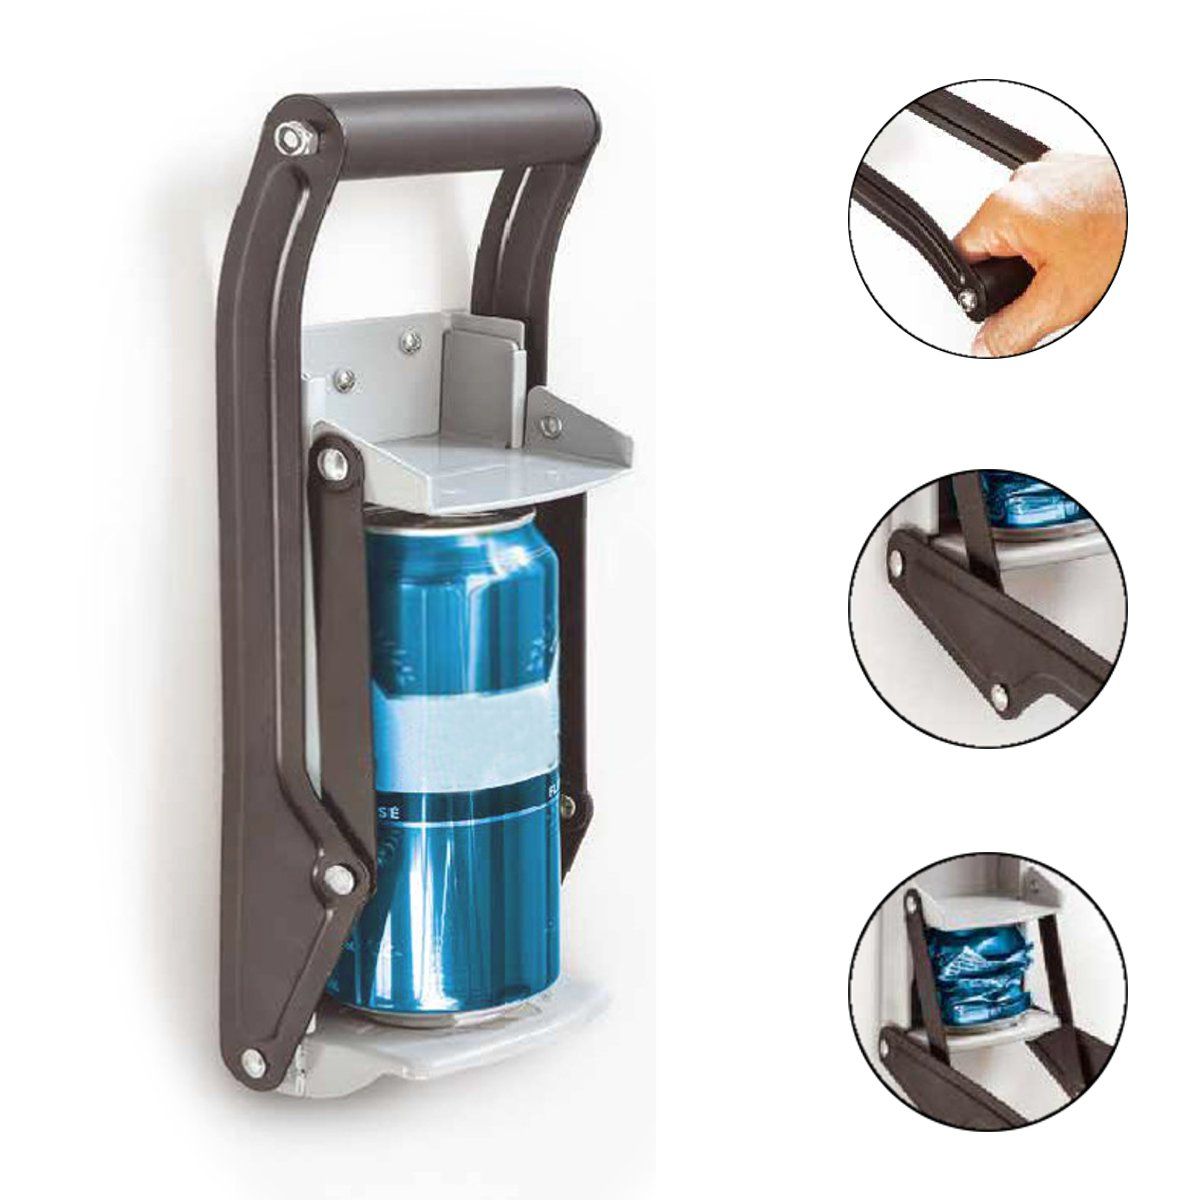 16oz-Tin-Can-Crusher-Soda-B-eer-Cola-Kitchen-Recycling-Heavy-Duty-Compacter-Opener-1461260